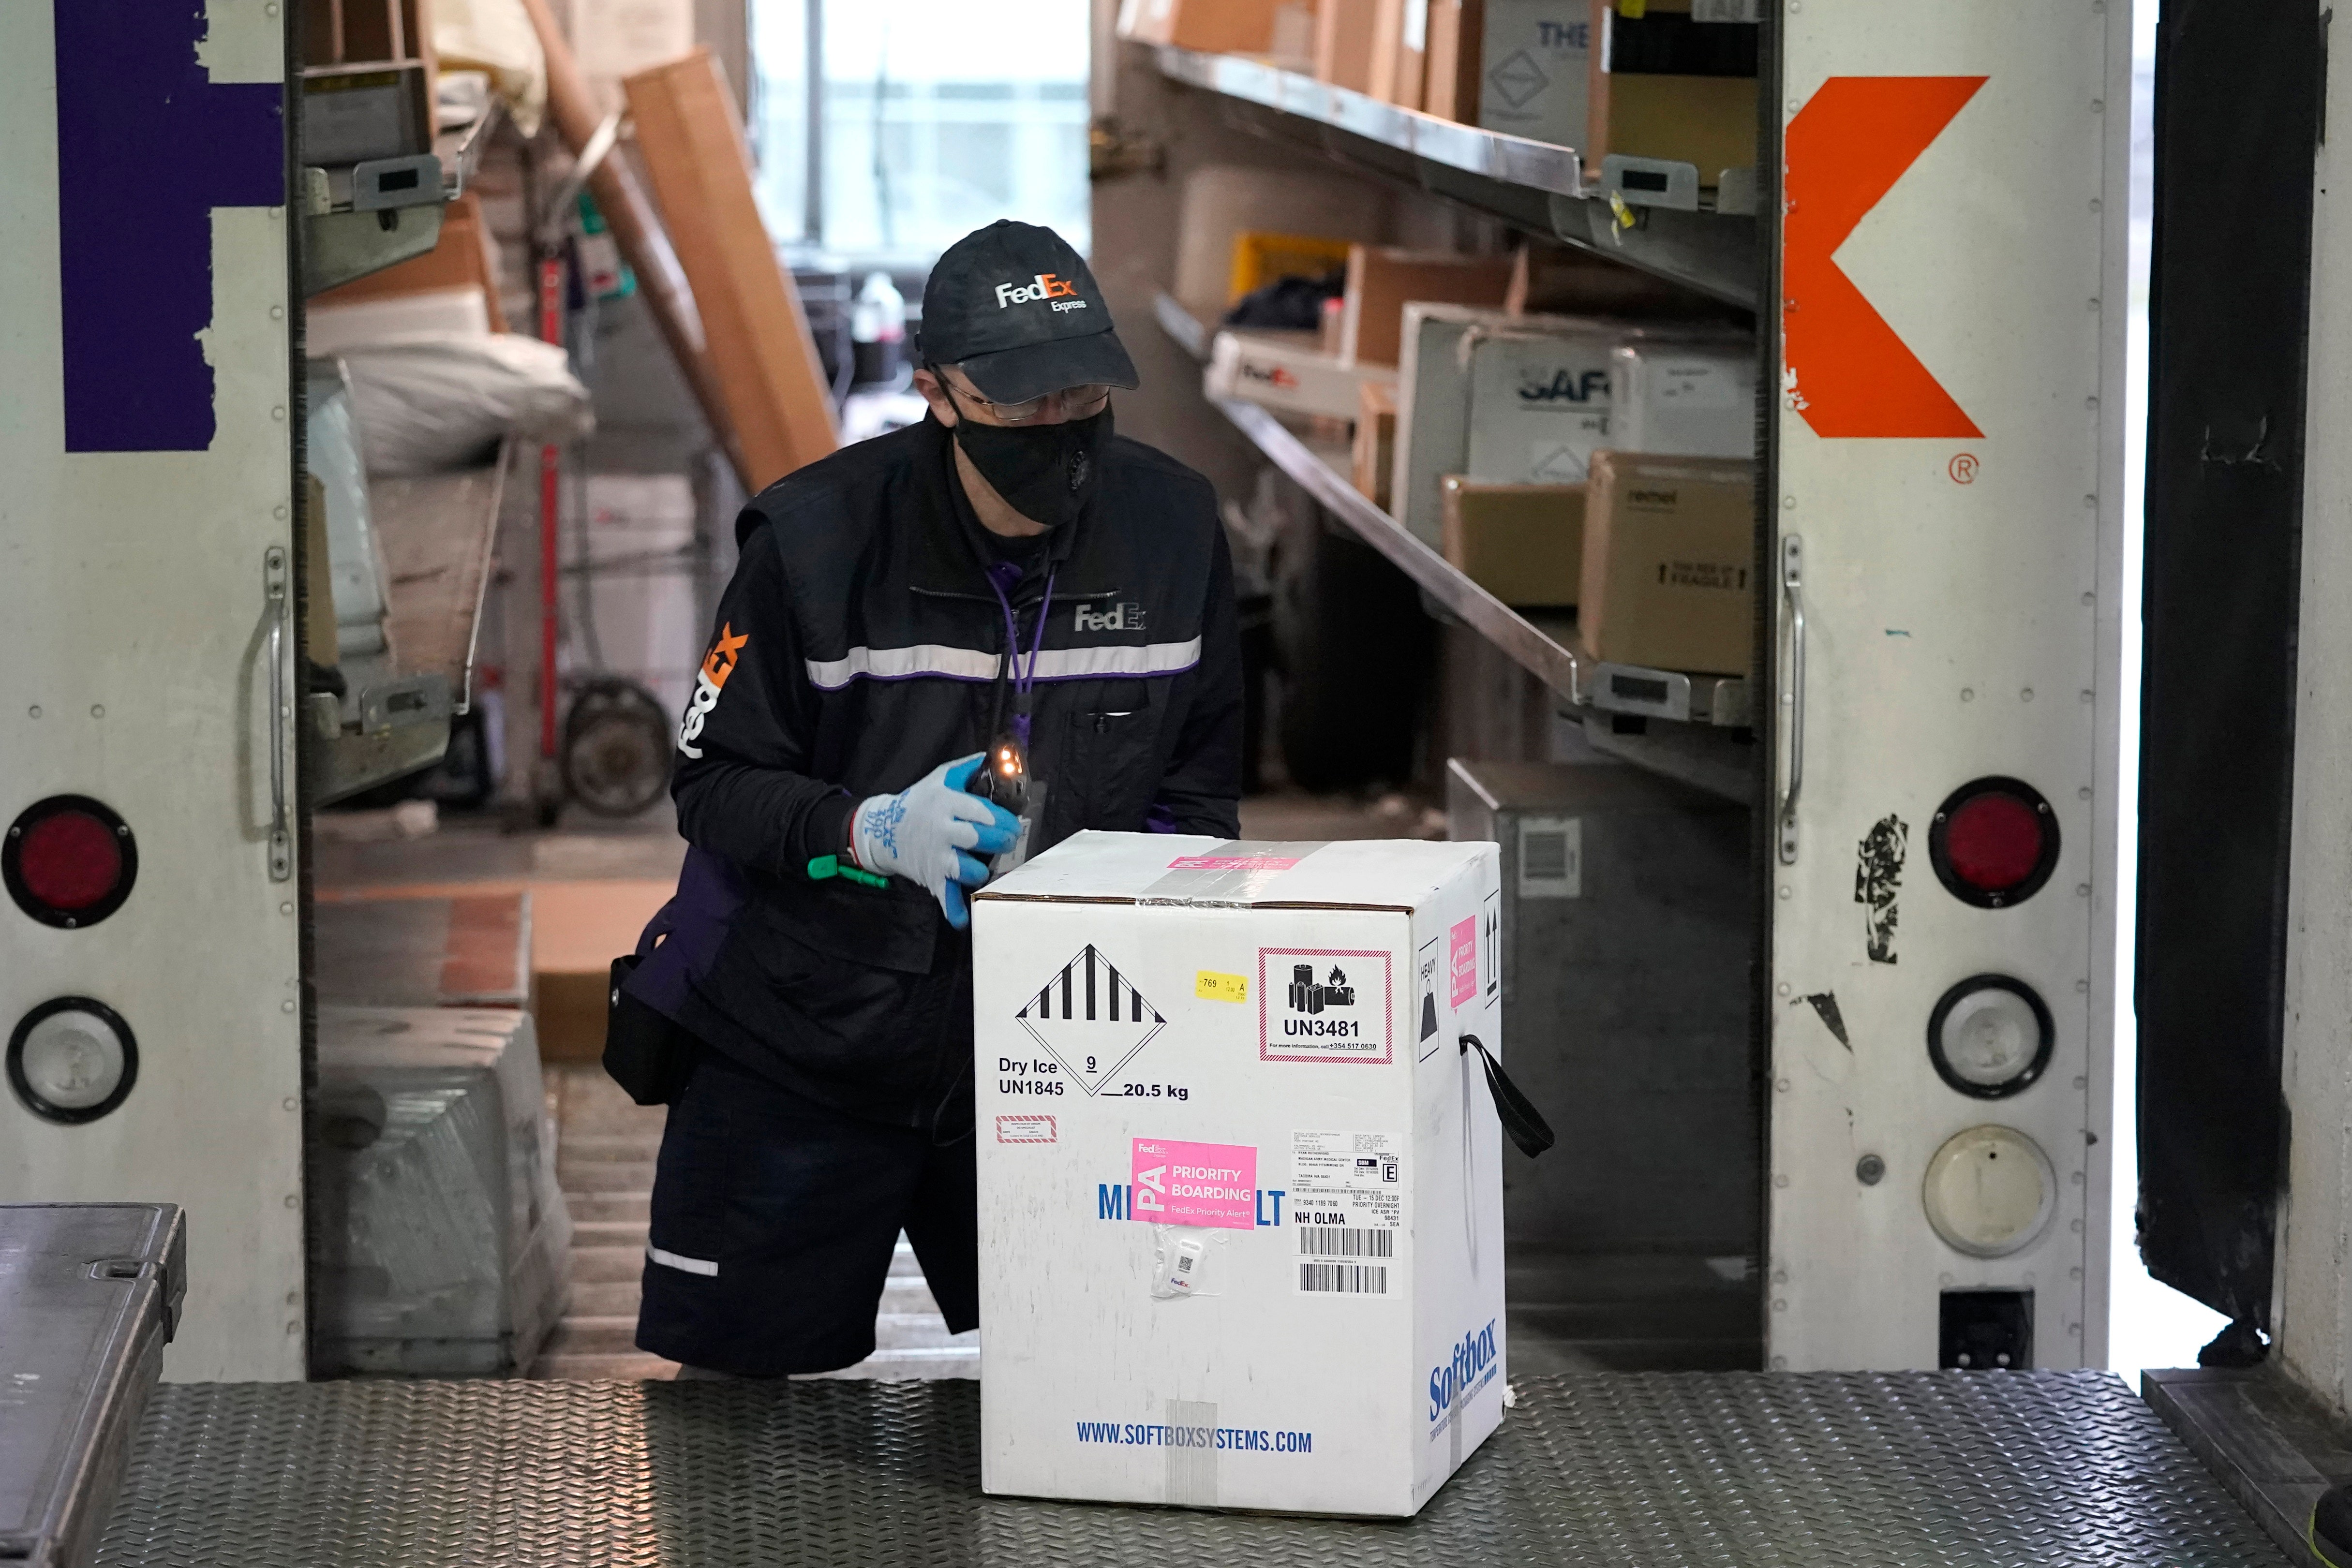 FedEx is ready for additional distribution of COVID-19 vaccine here and abroad, supporting an “unparalleled” delivery network